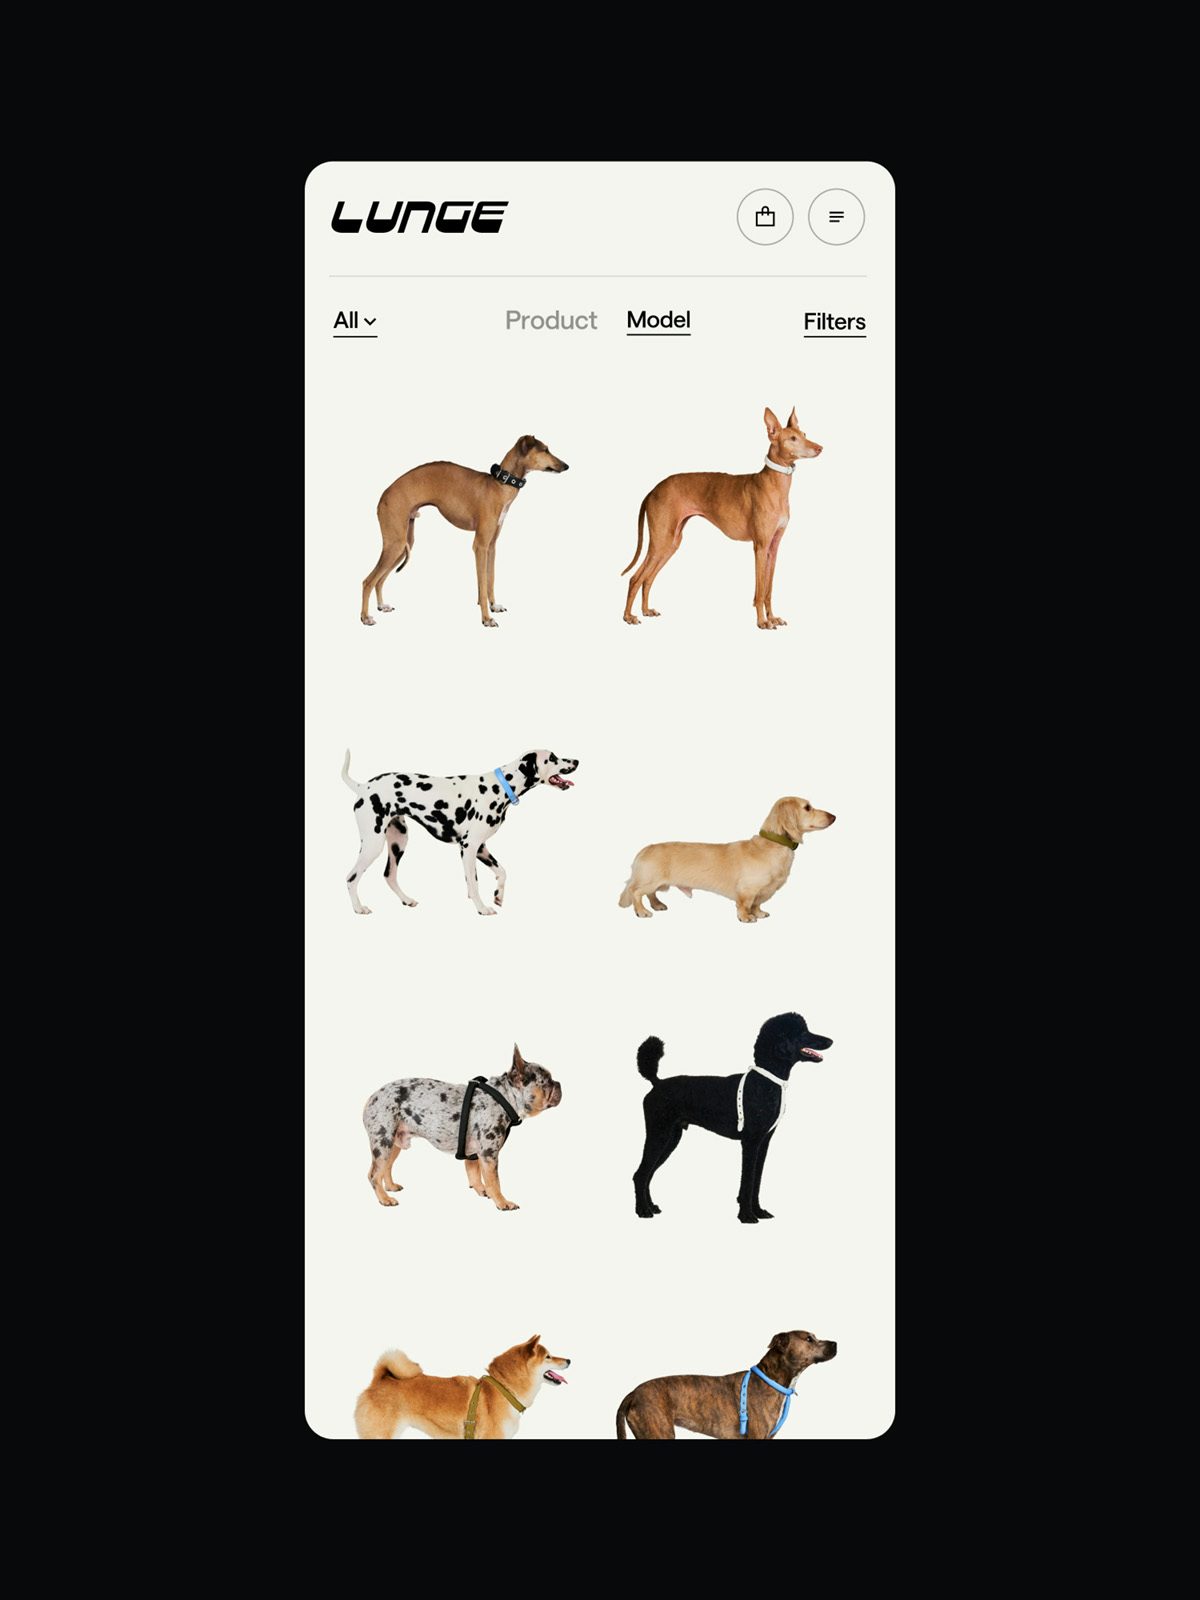 Image showing the identity for Lunge on its website featuring images of dogs wearing pet accessories